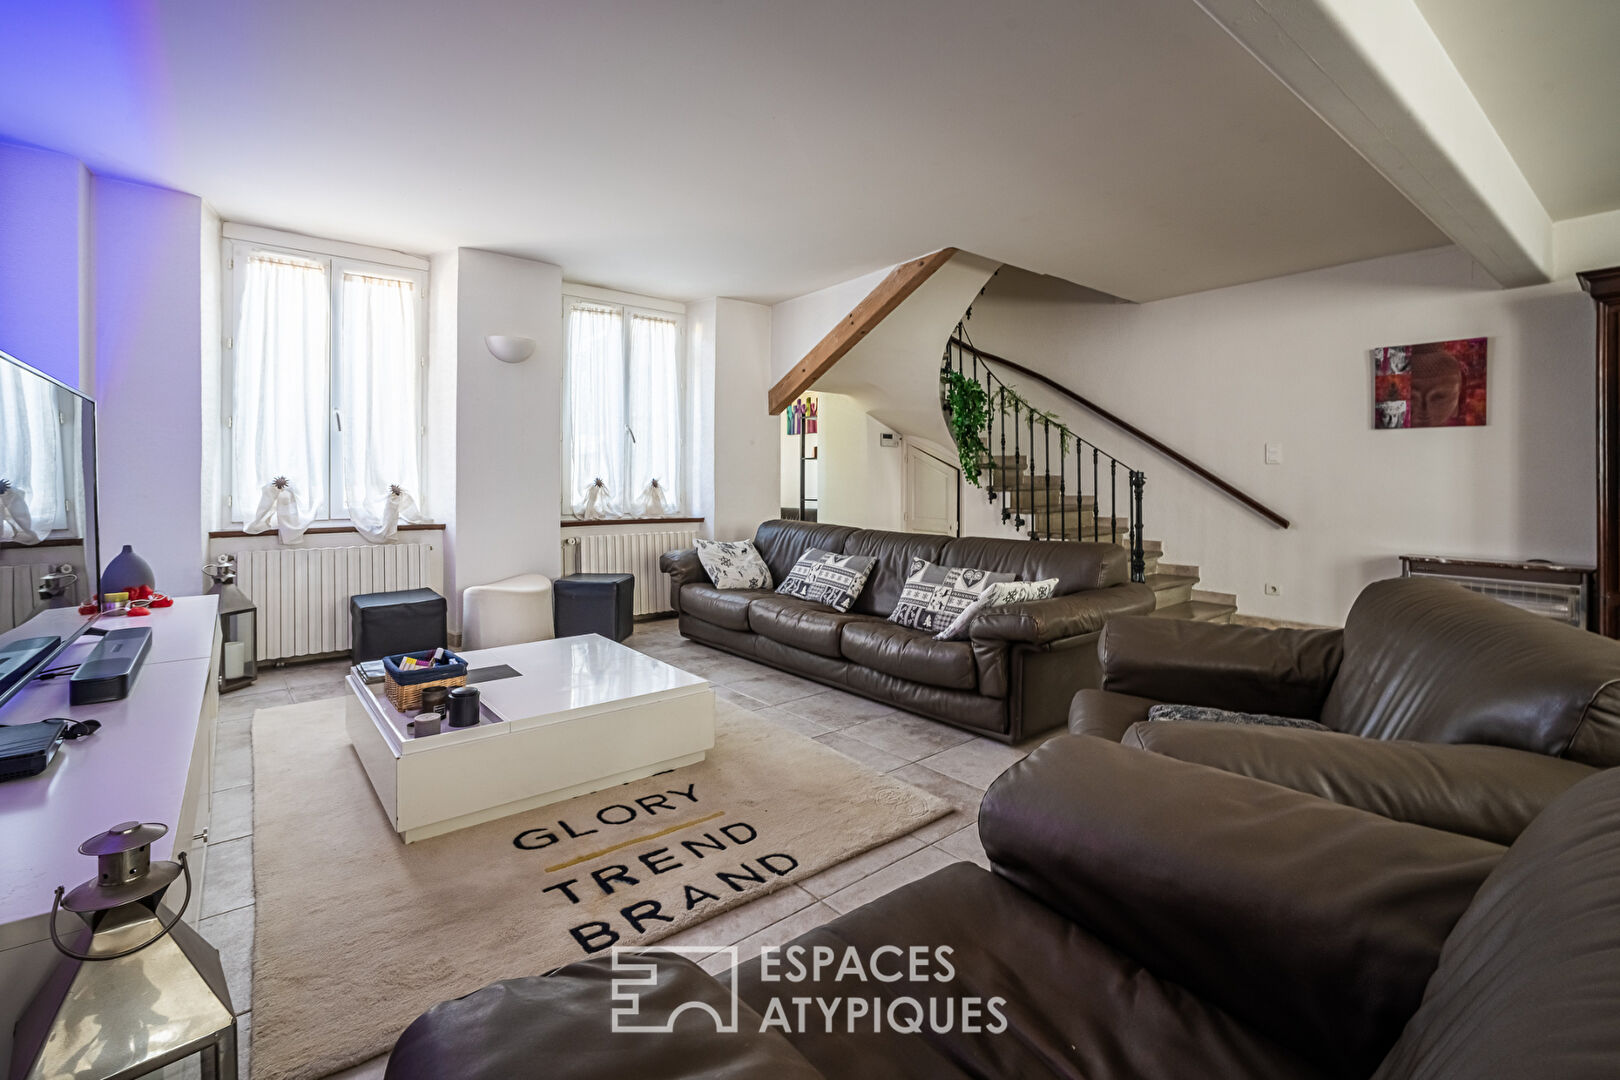 219sqm house with terrace and garage in Douzens